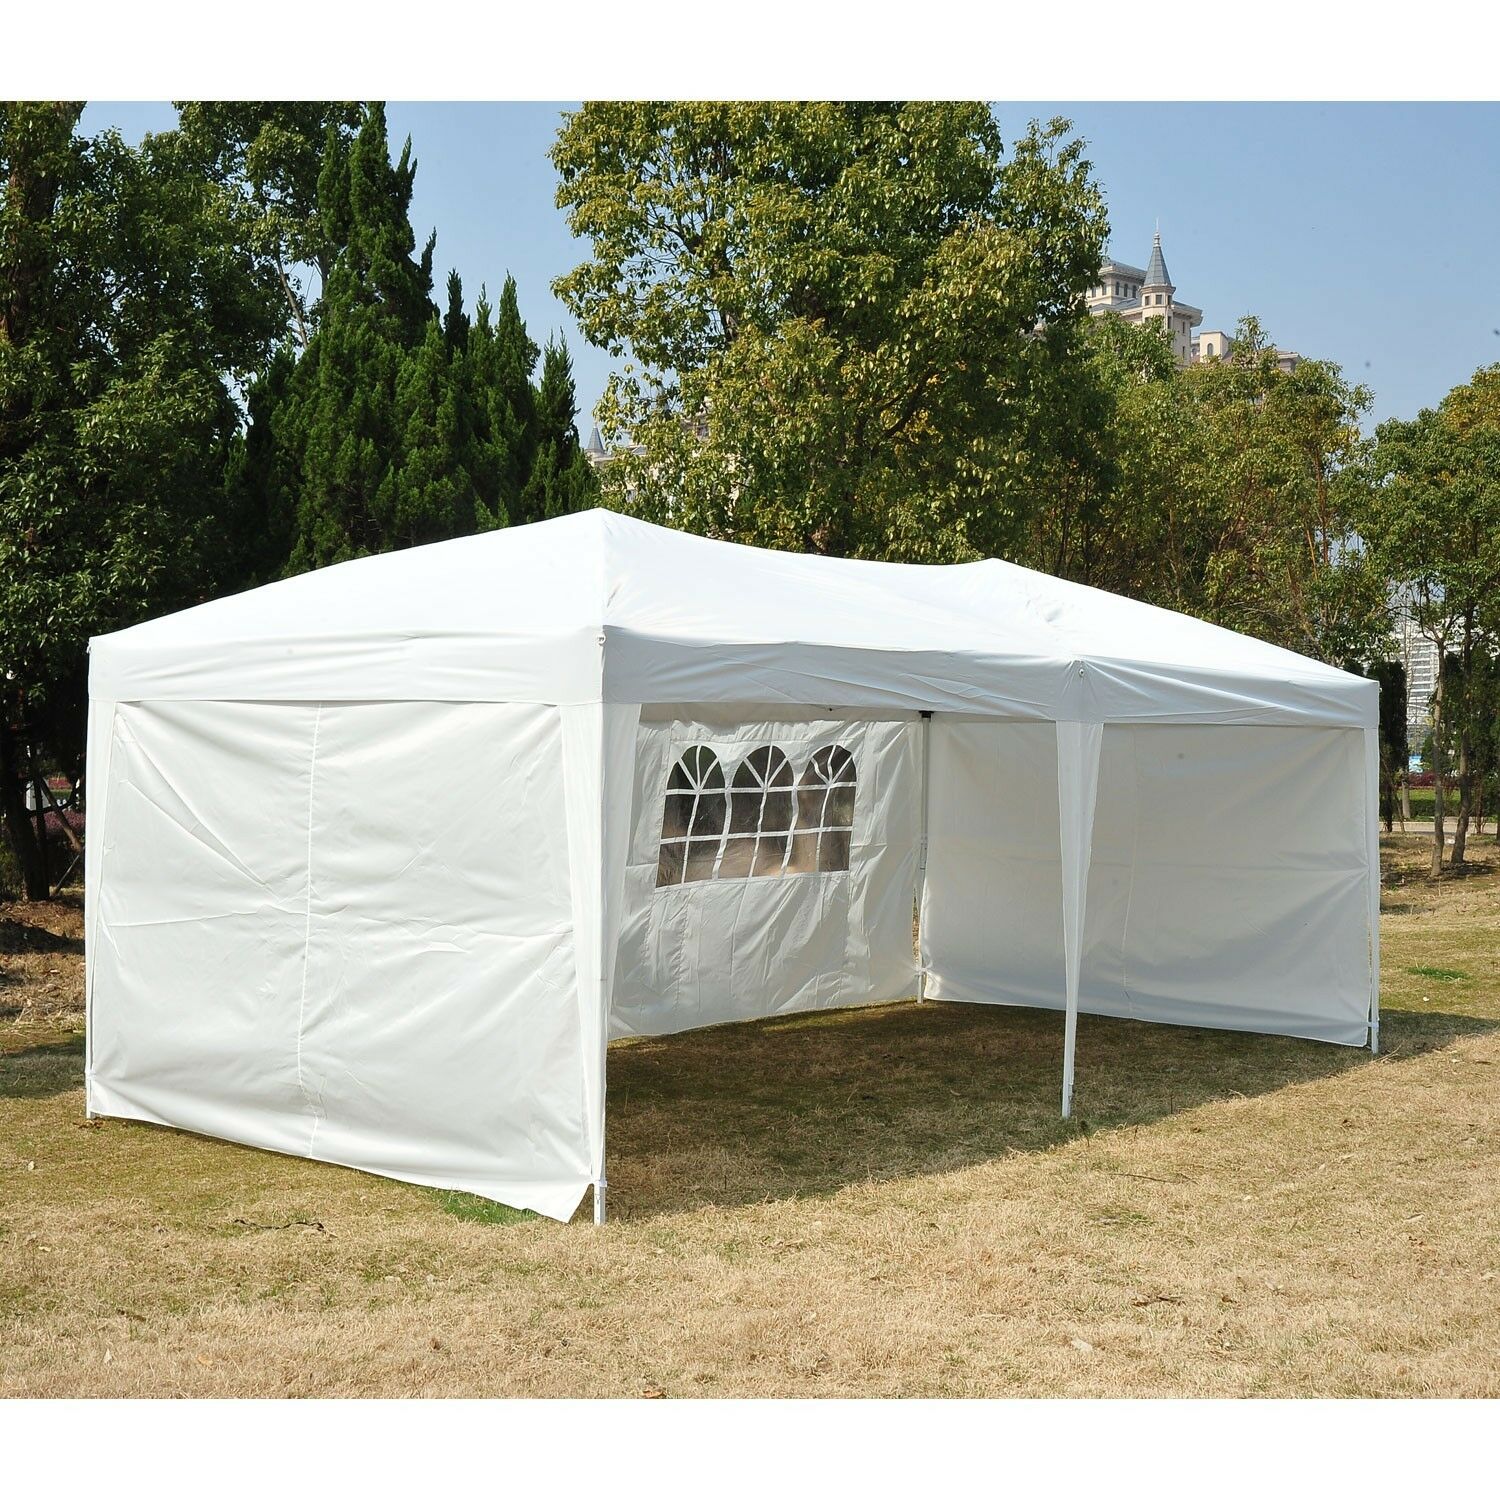 

10' X 20' Outdoor Patio Gazebo Party Tent Non-Top Wedding Canopy with Carry Bag